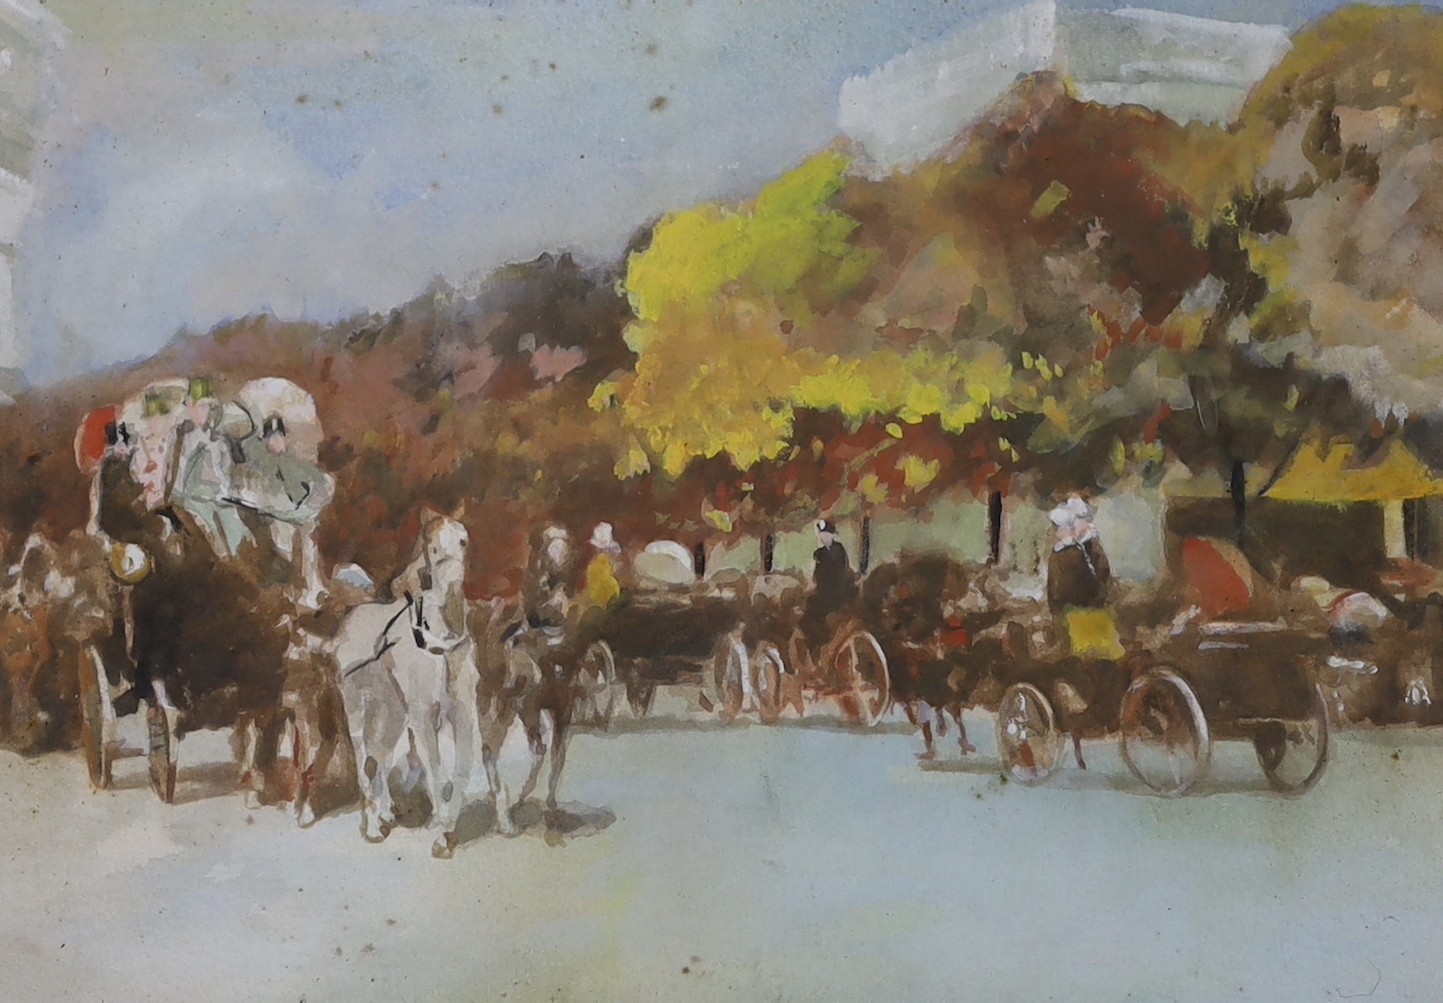 After Frederick Childe Hassam (1859-1935), watercolour, 'Carriages on an avenue, Paris 1887', bears signature and date, 25 x 34cm